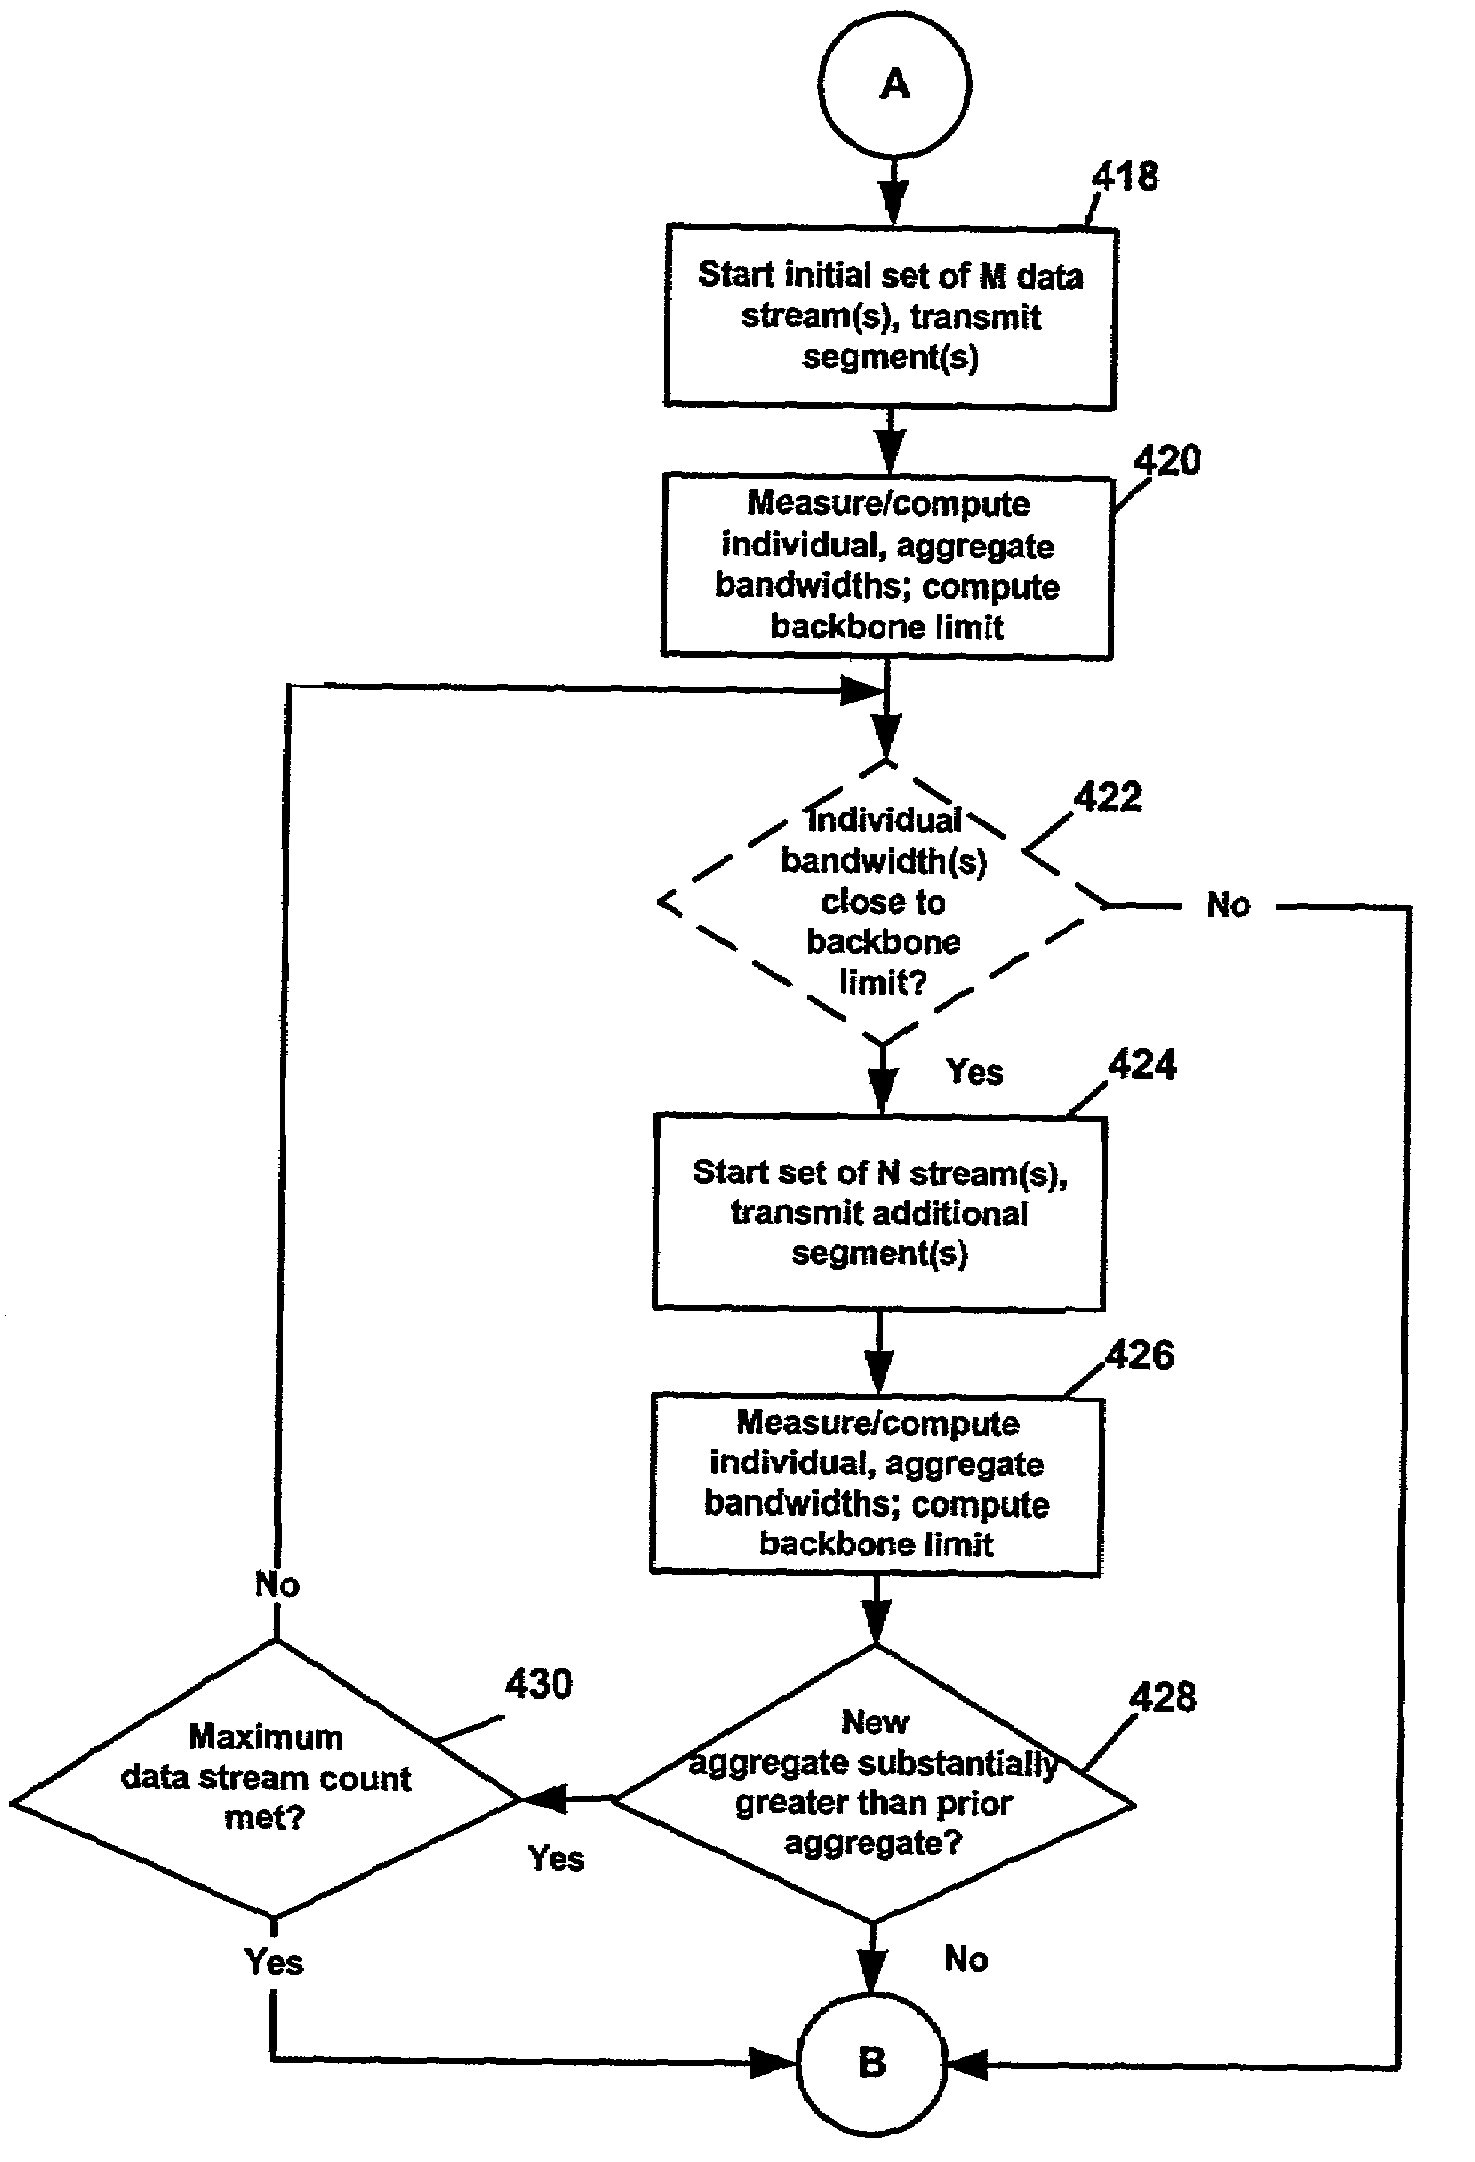 Load balancing and dynamic control of multiple data streams in a network